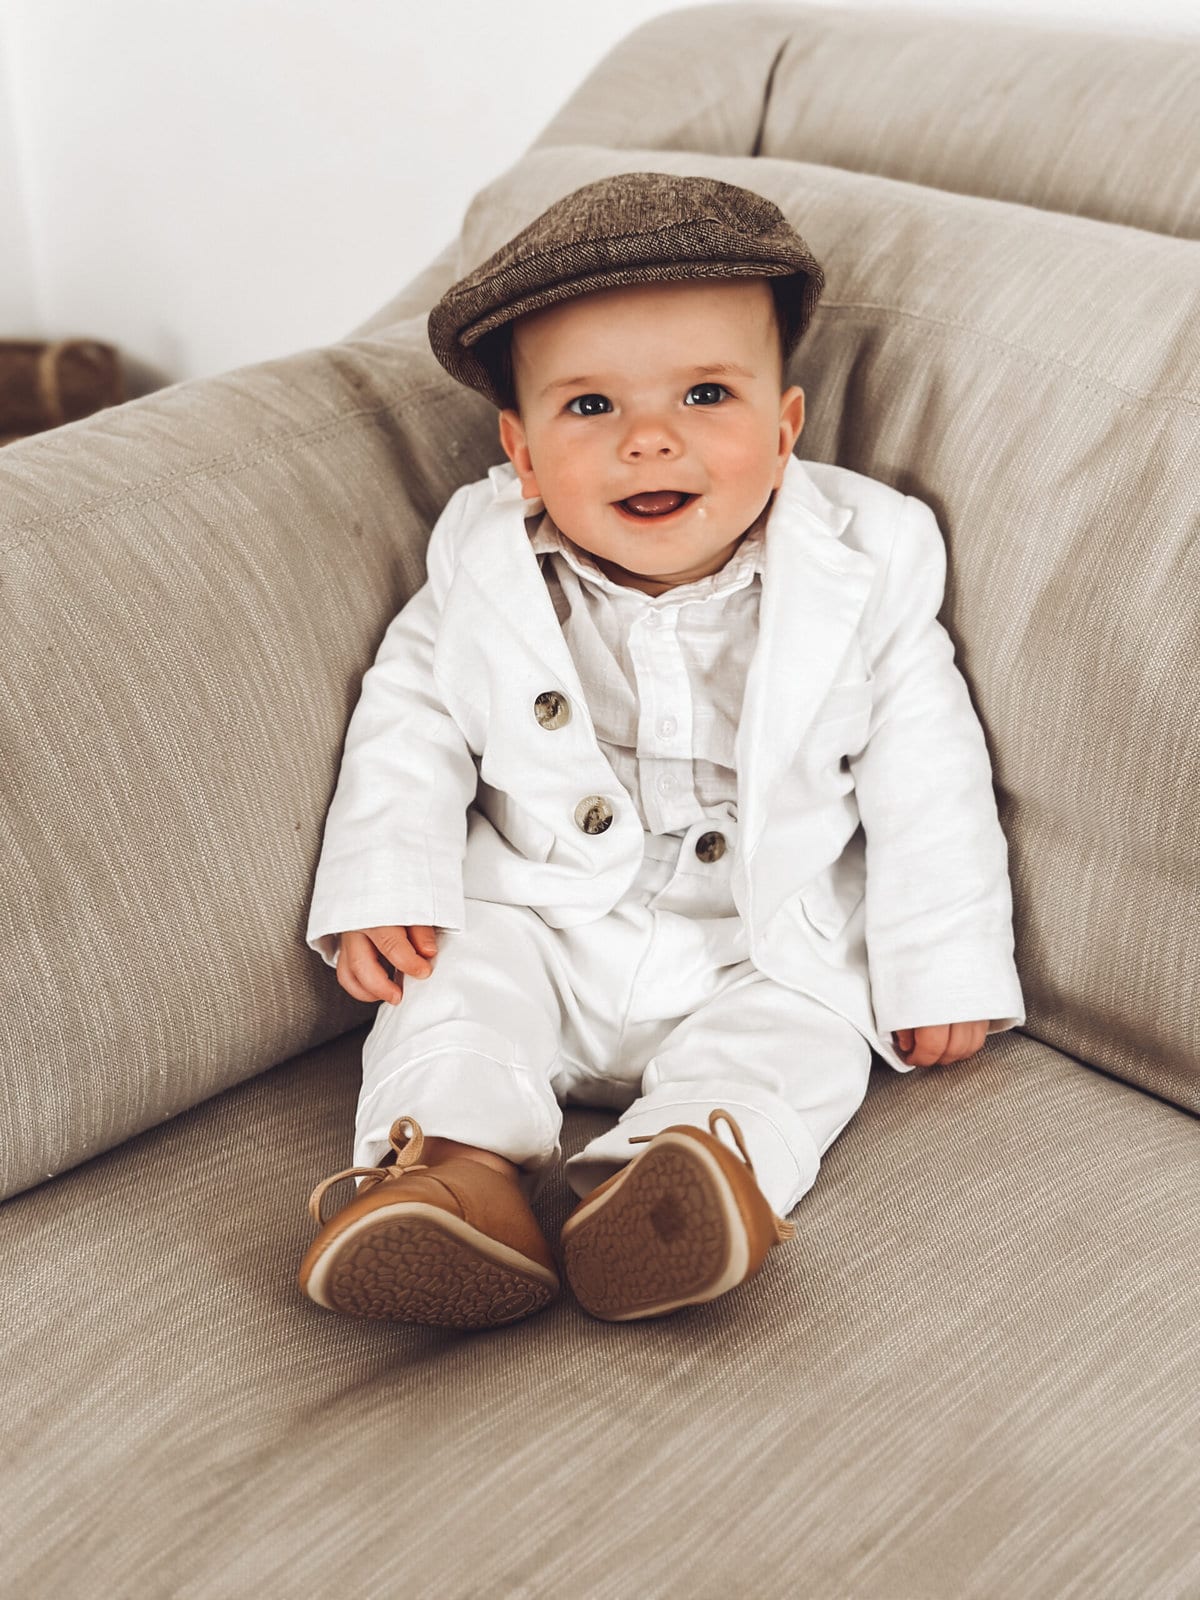 baby outfit and hat amazon